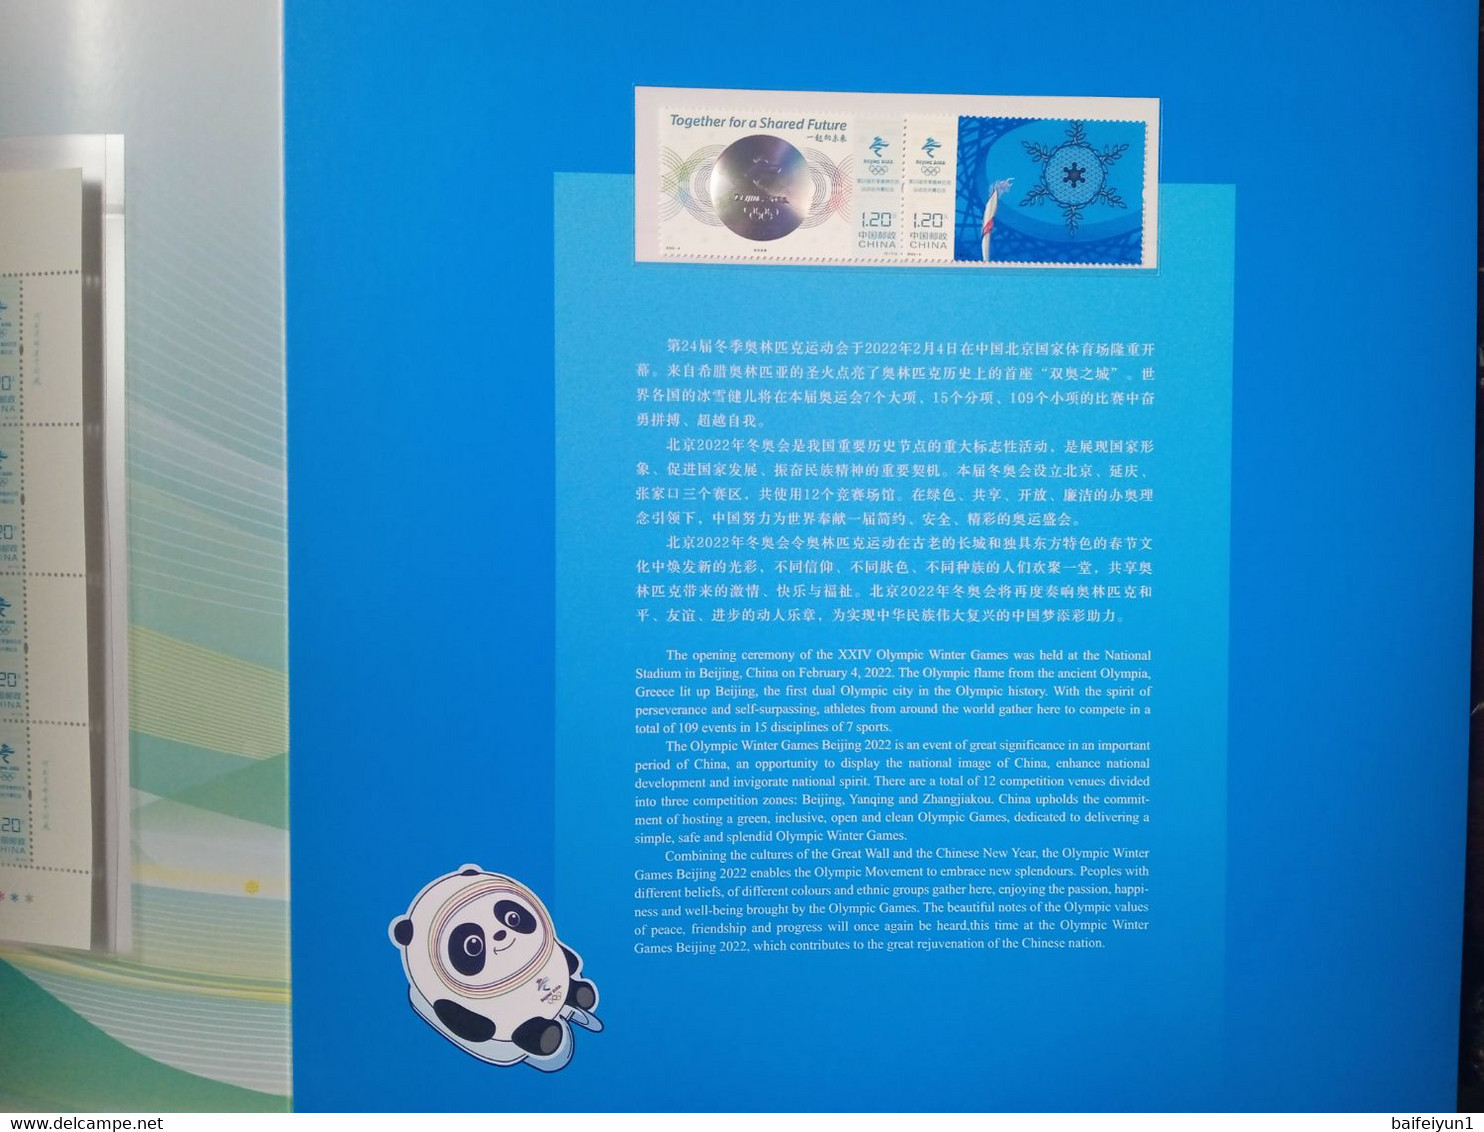 China 2022-4 The Opening Ceremony Of The 2022 Winter Olympics Game Stamps 2v(Hologram) Full Sheet Folder - Invierno 2022 : Pekín